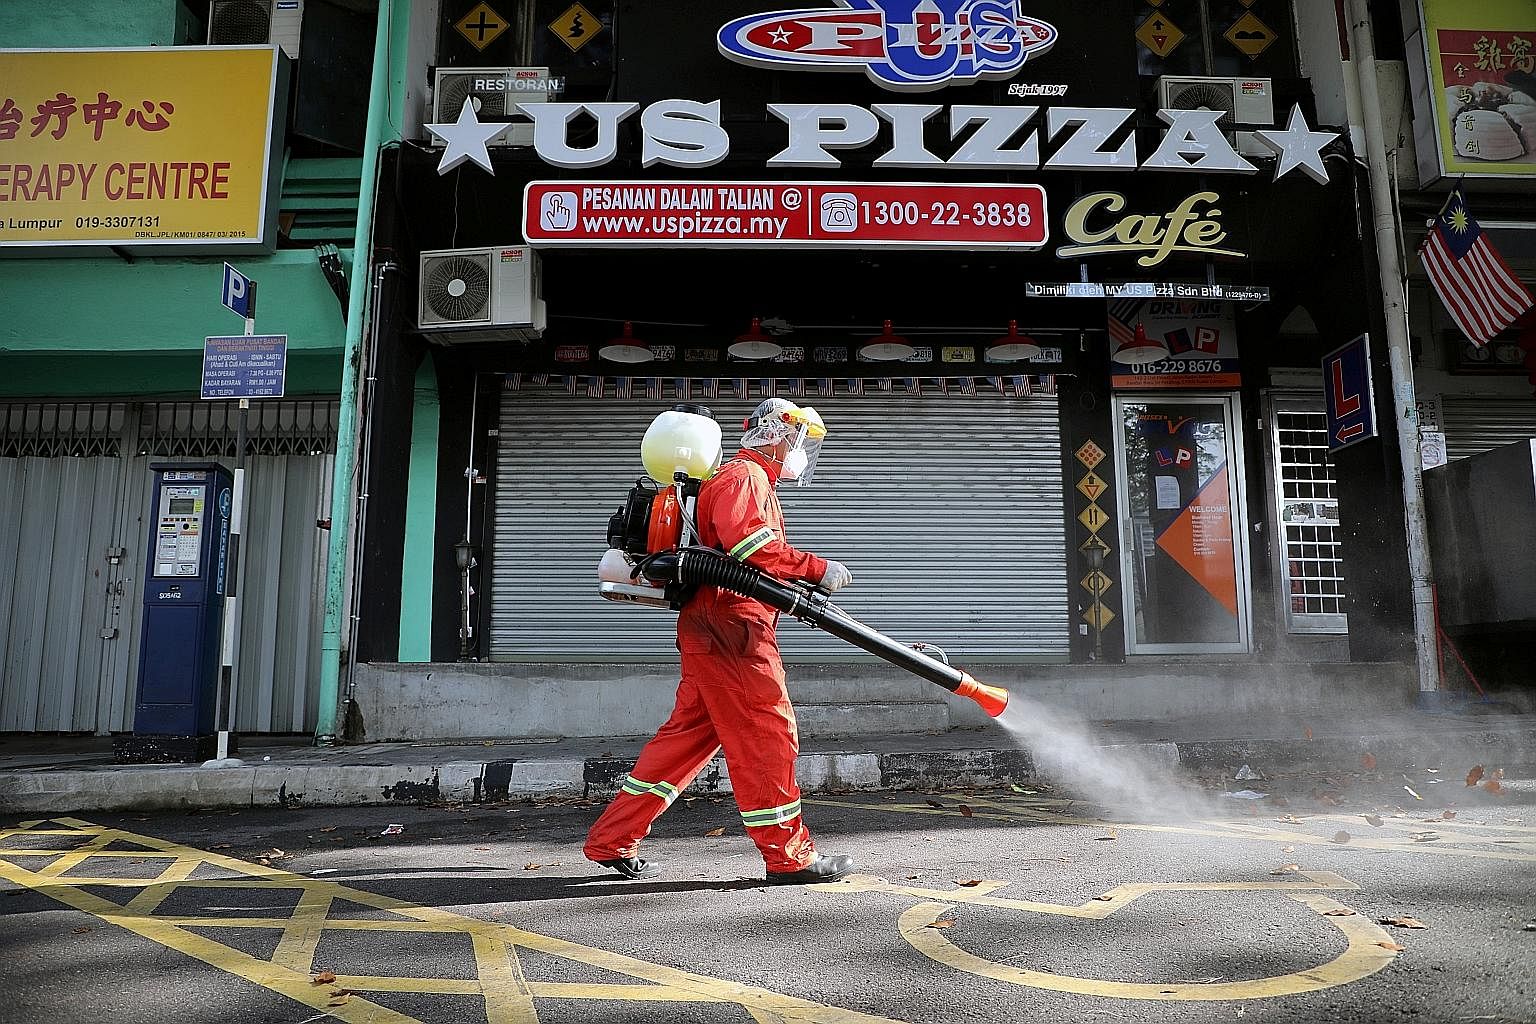 A worker spraying disinfectant on a street in Kuala Lumpur yesterday, while the movement control order is in place due to the coronavirus outbreak. Malaysia on Friday unveiled a RM250 billion (S$83.4 billion) stimulus package to cushion the country's